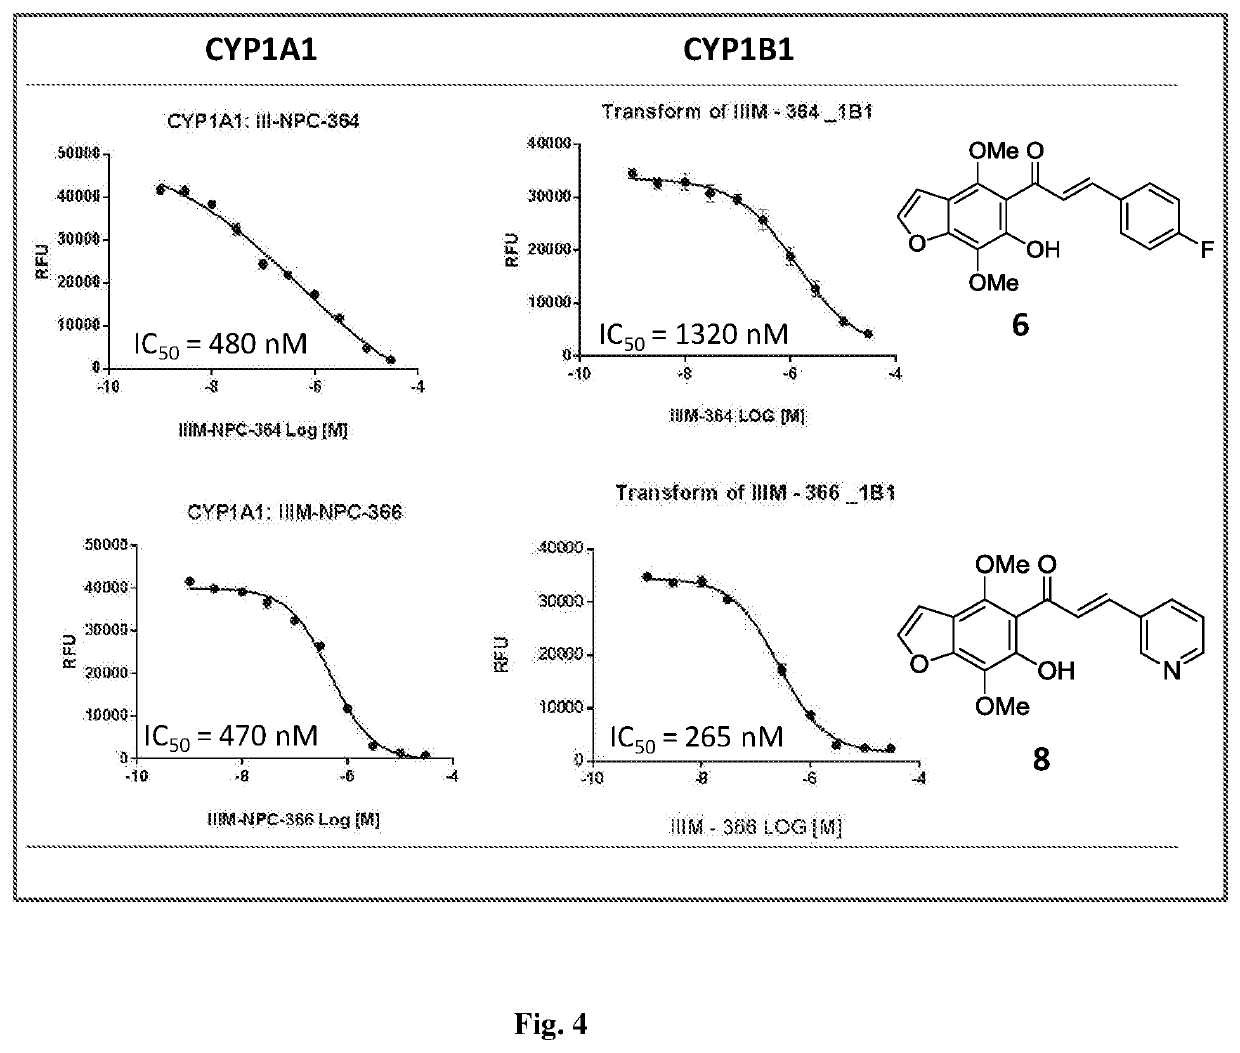 Furanochalcones as inhibitors of cyp1a1, cyp1a2 and cyp1b1 for cancer chemoprevention